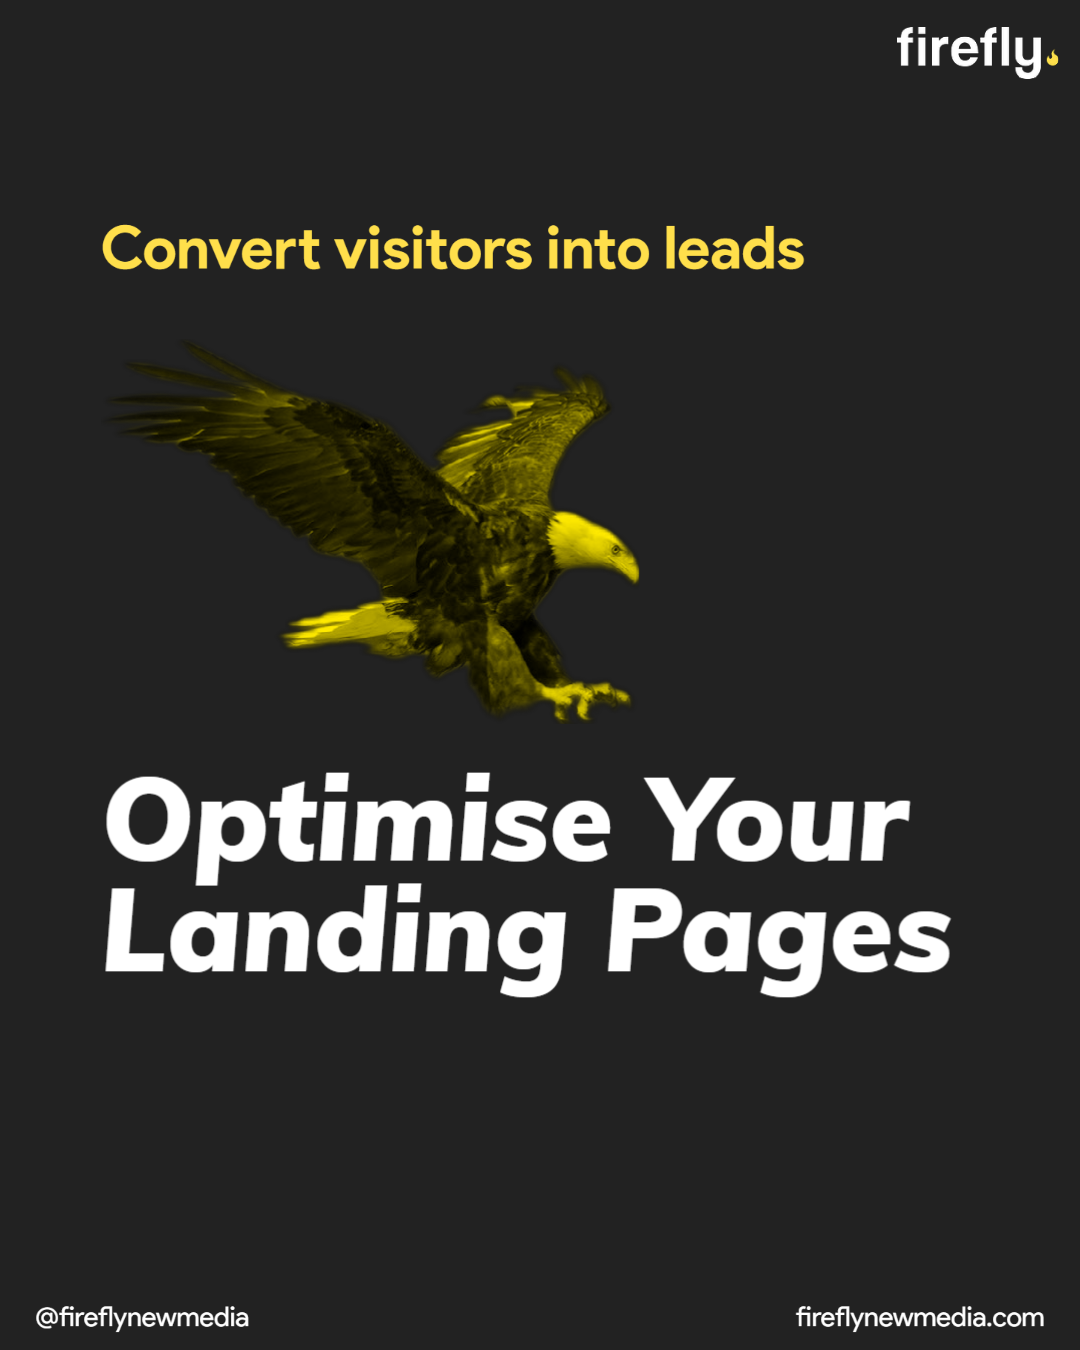 Optimise for landing pages: Convert visitors into leads